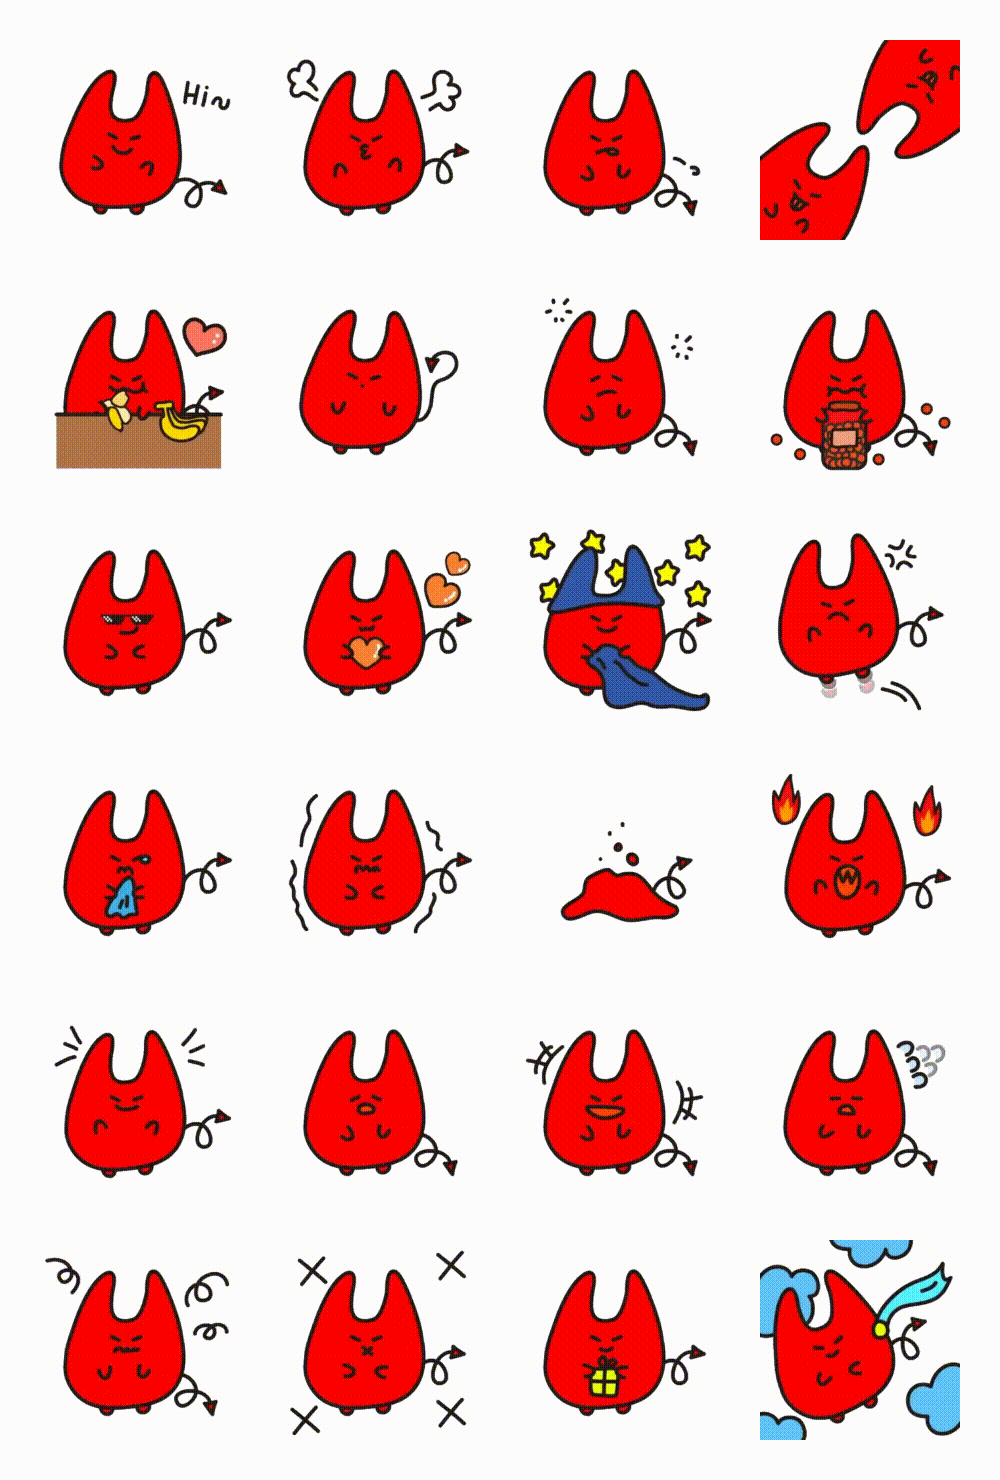 Red devil Etc. sticker pack for Whatsapp, Telegram, Signal, and others chatting and message apps